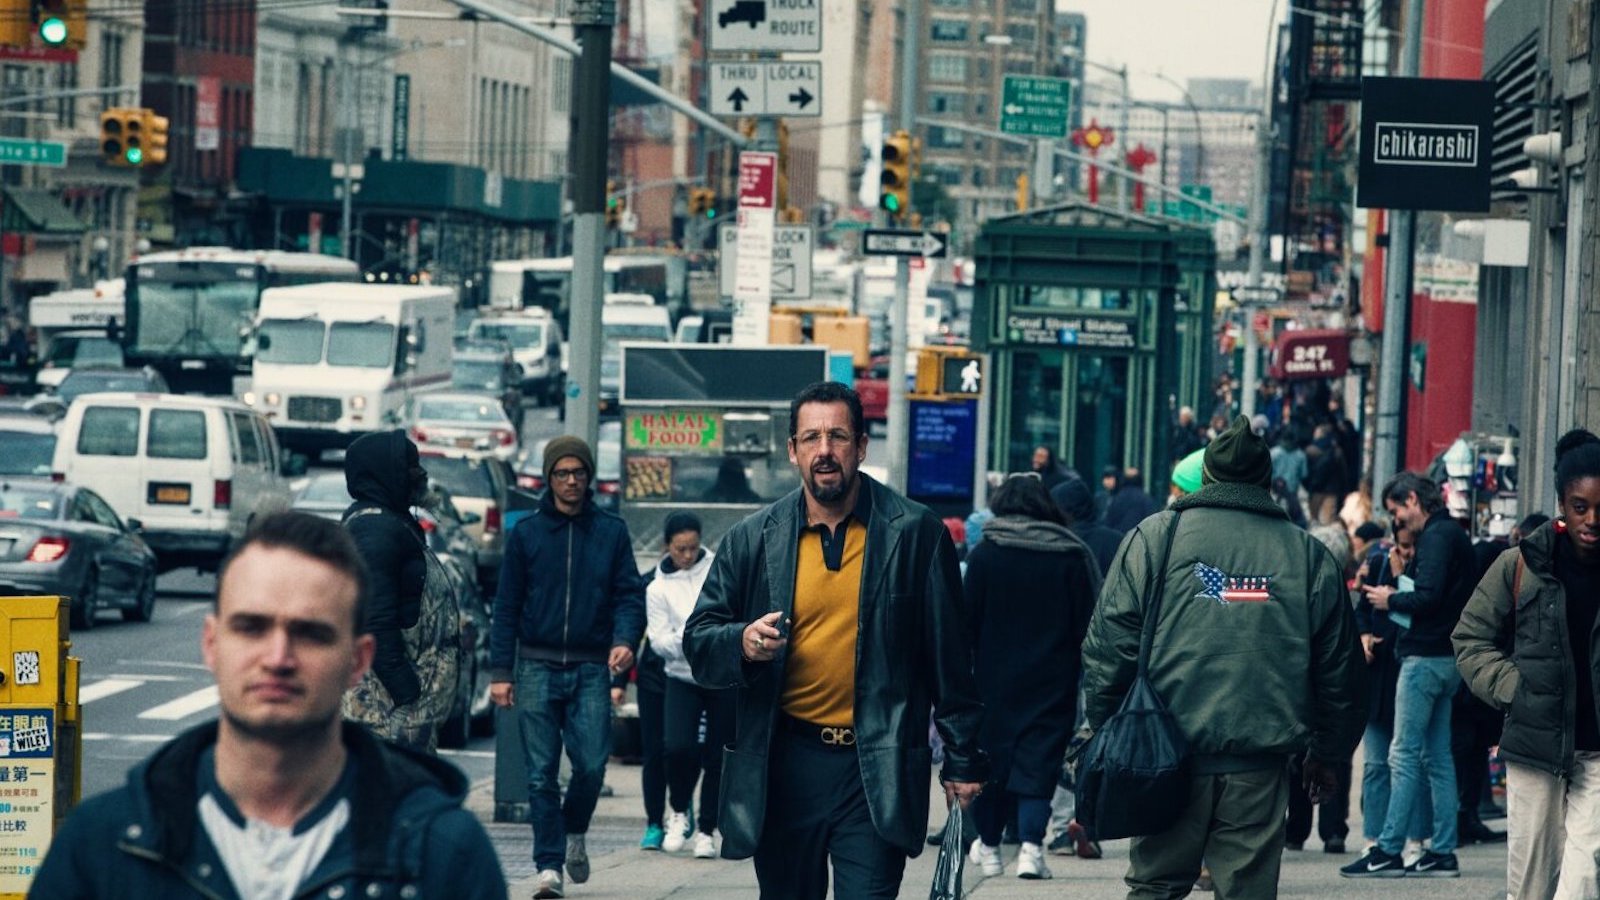 A man in yellow shirt and blue jacket walks through a crowded midtown NYC street